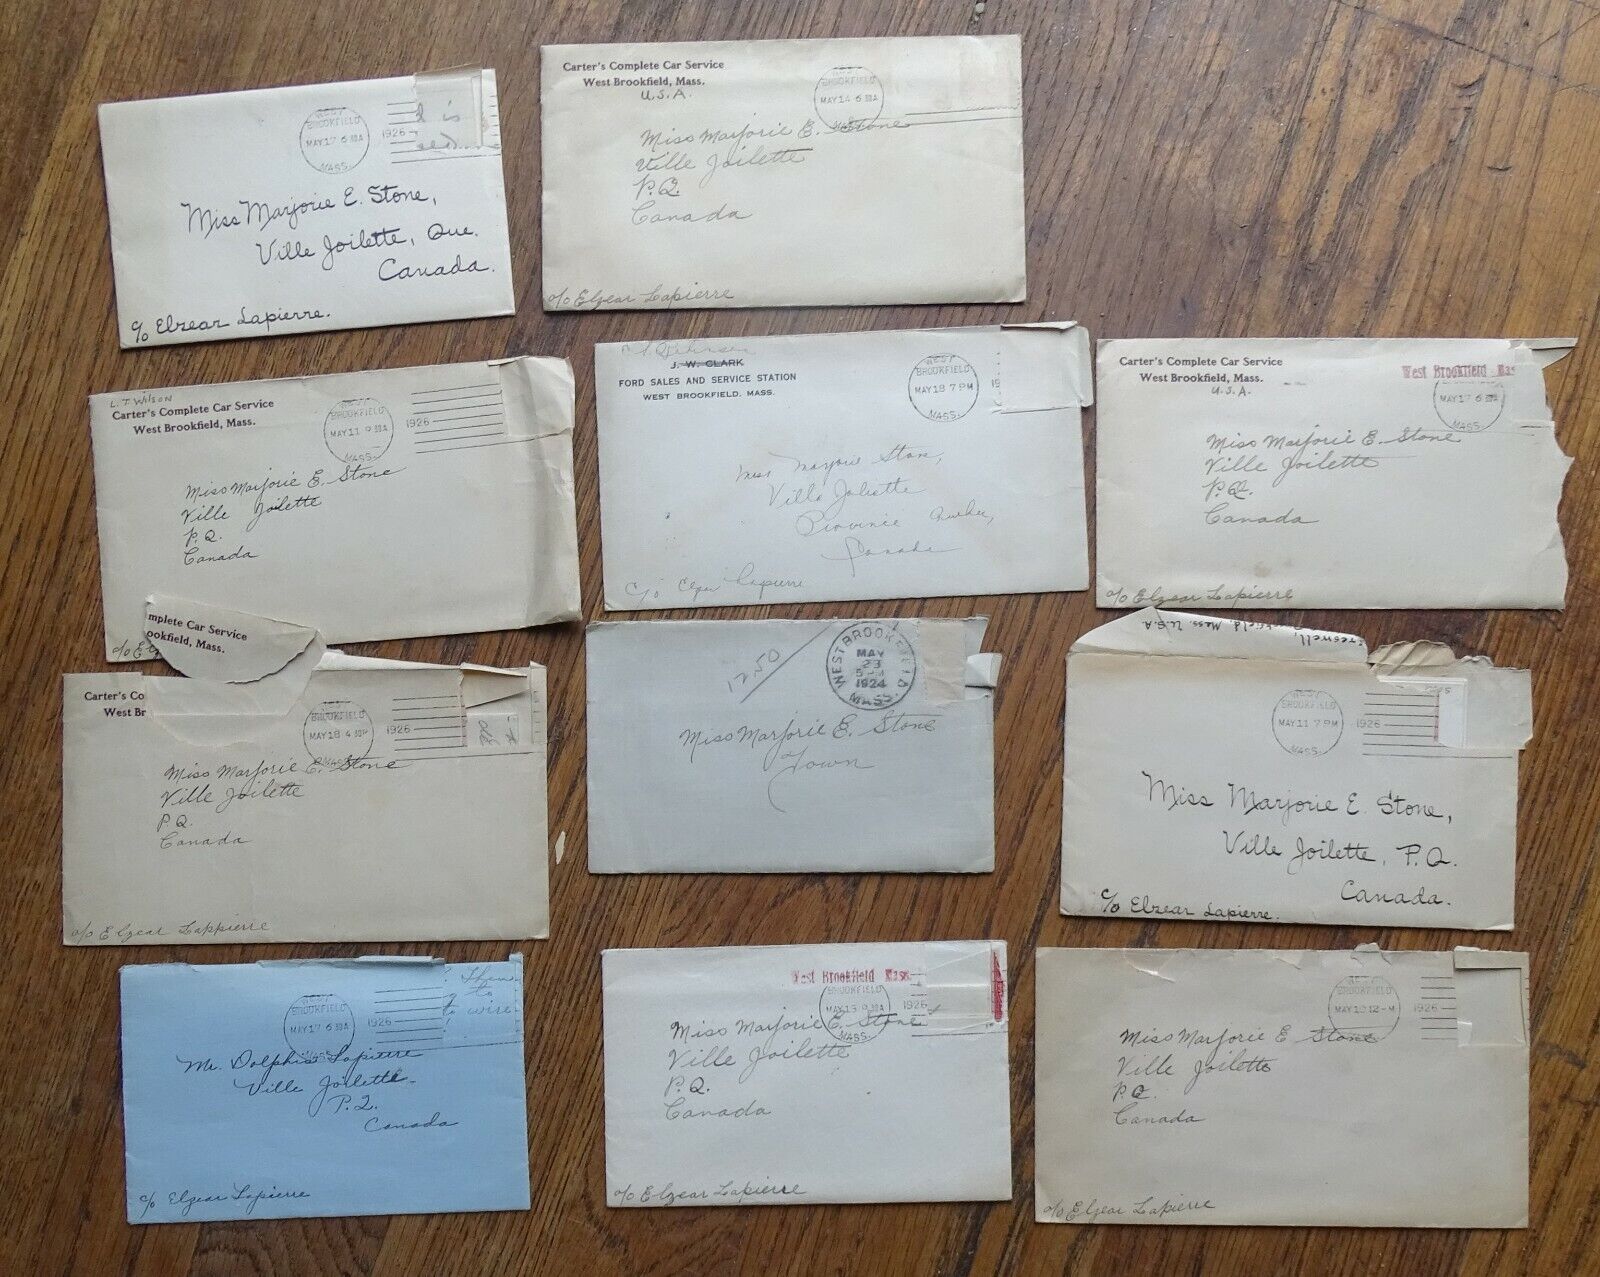 West Brookfield MA 1924-1926 TEN Sent Letters to Marjorie E. Stone in Canada